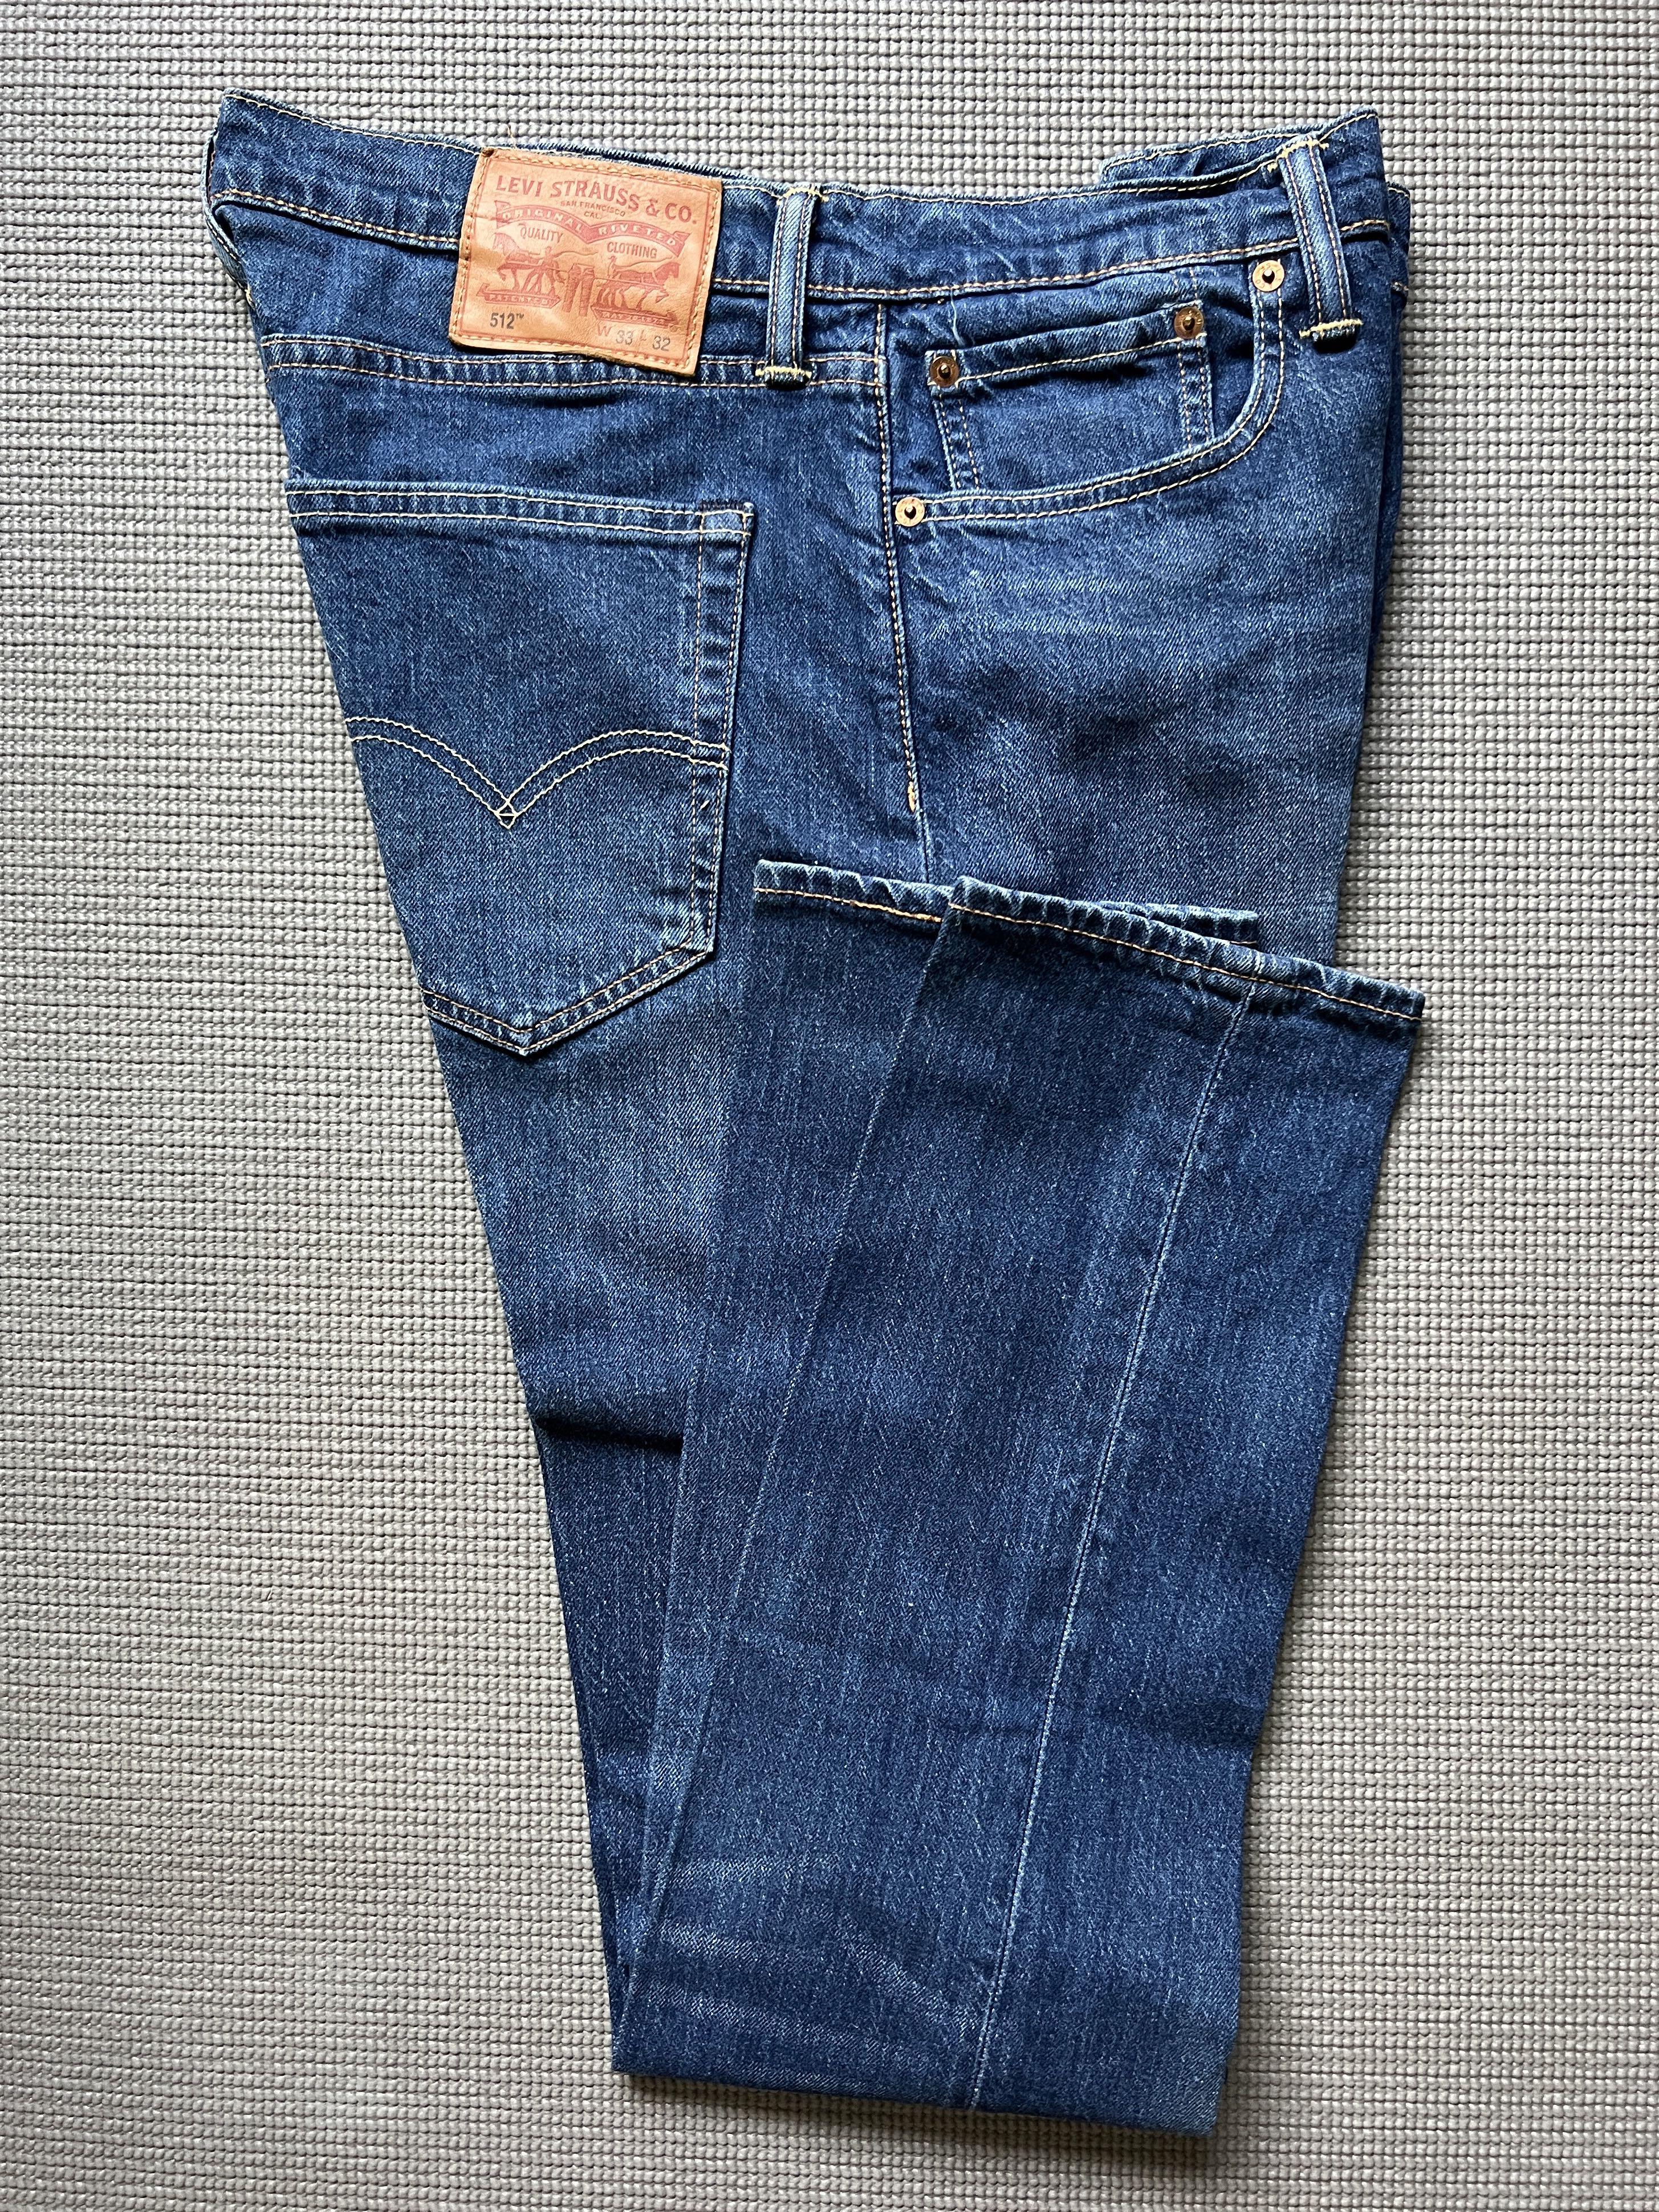 Levi's 512 Denim Jeans 33x32 Skinny Fit Made in Poland, Men's Fashion,  Bottoms, Jeans on Carousell